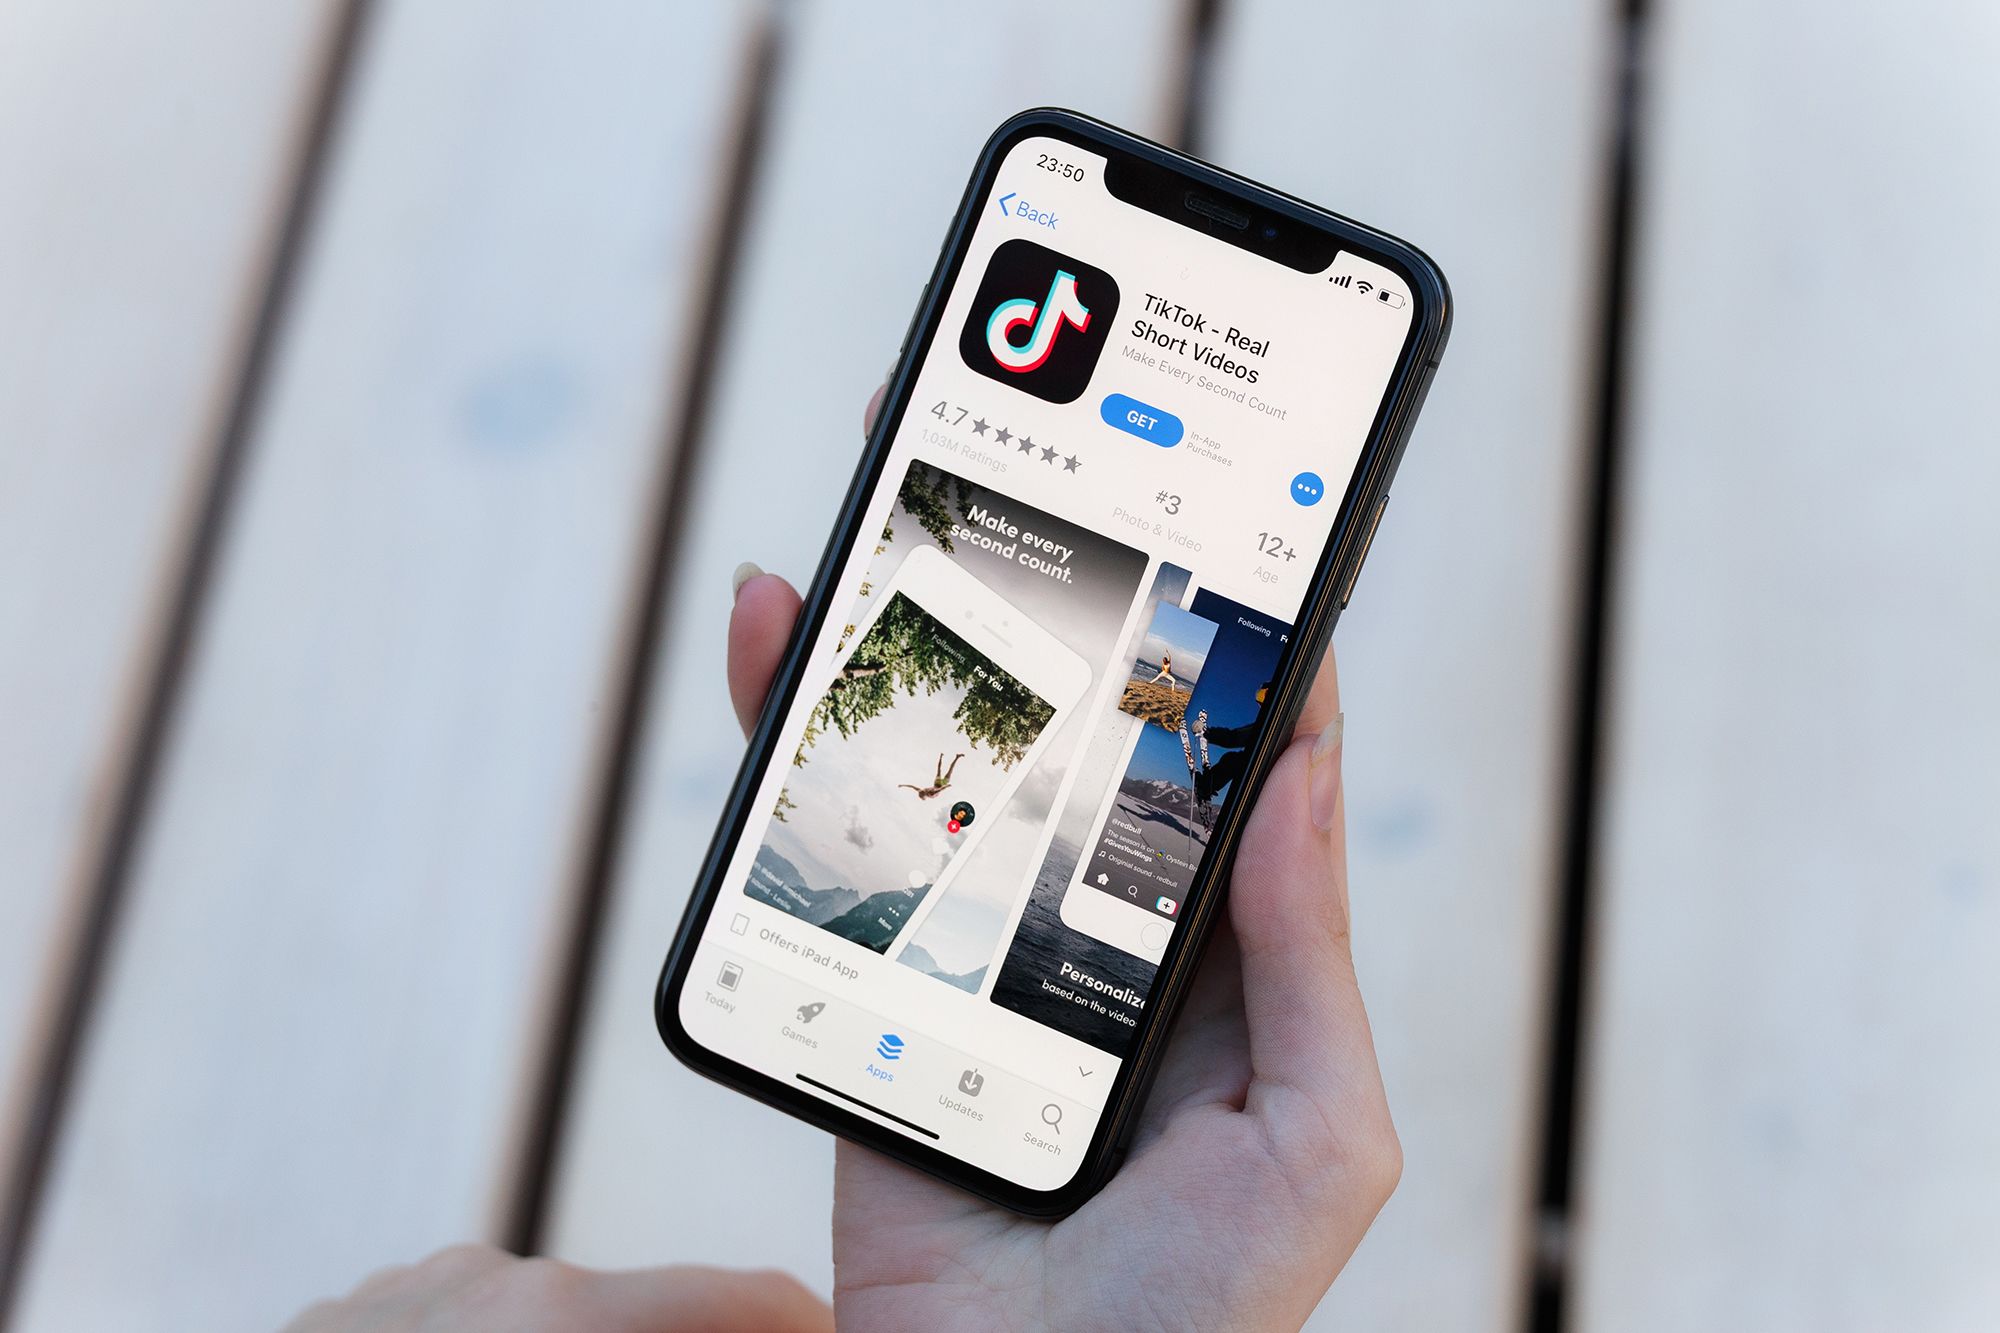 TikTok restricts tool used by researchers - and its critics - to assess  content on its platform